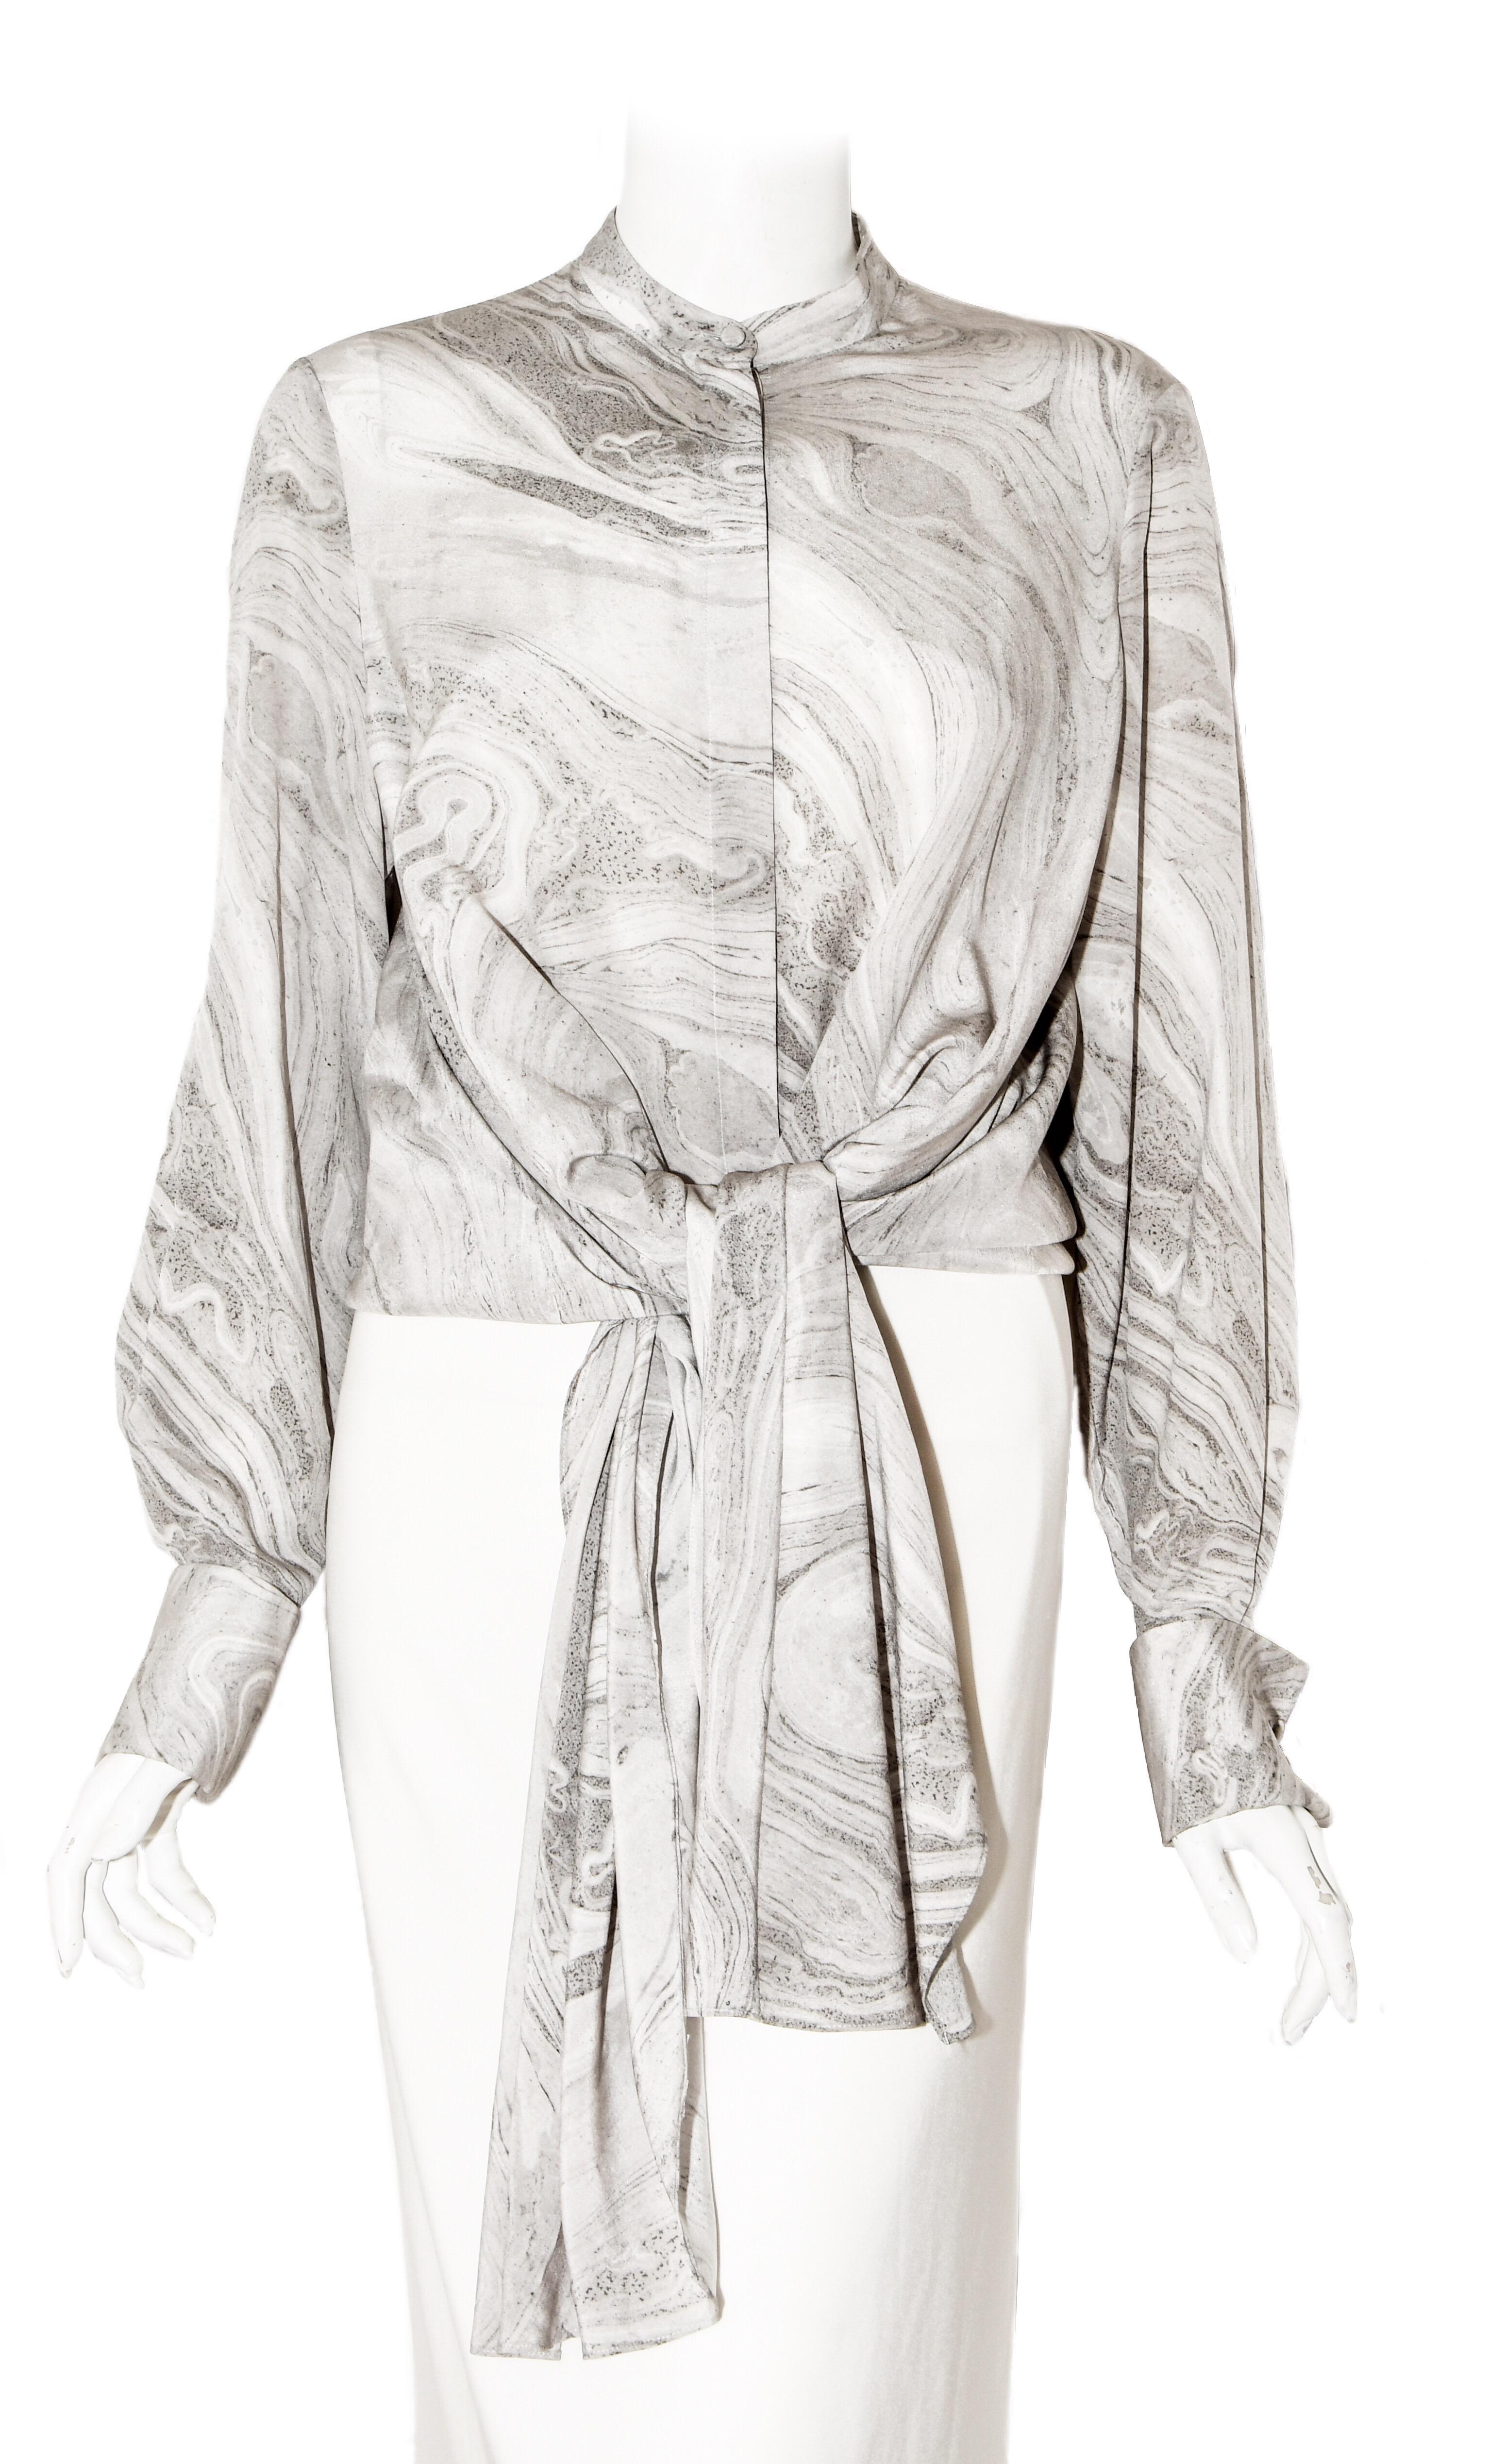 Alexander McQueen silk grey marble design blouse with mandarin collar incorporates long sleeves with up cuffs and covered cuffling style buttons.  With front button closure and asymmetric hem longer at the sides, this oversize blouse is modern and